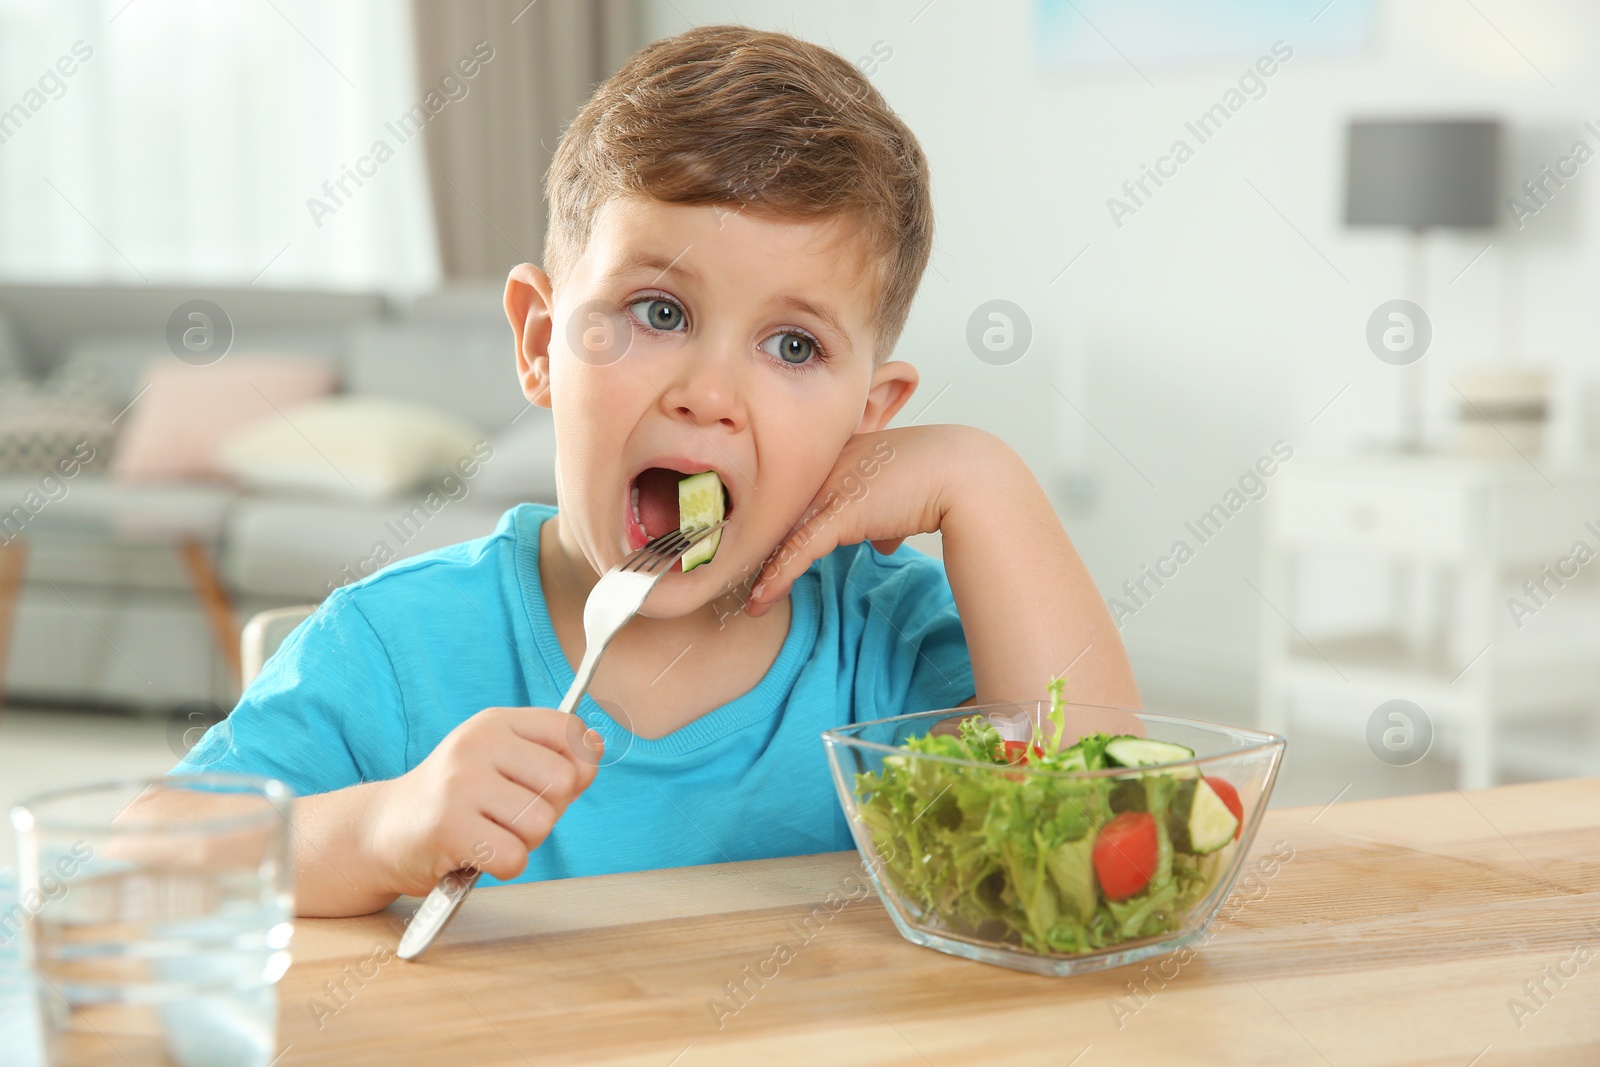 Photo of Adorable little boy eating vegetable salad at table in room